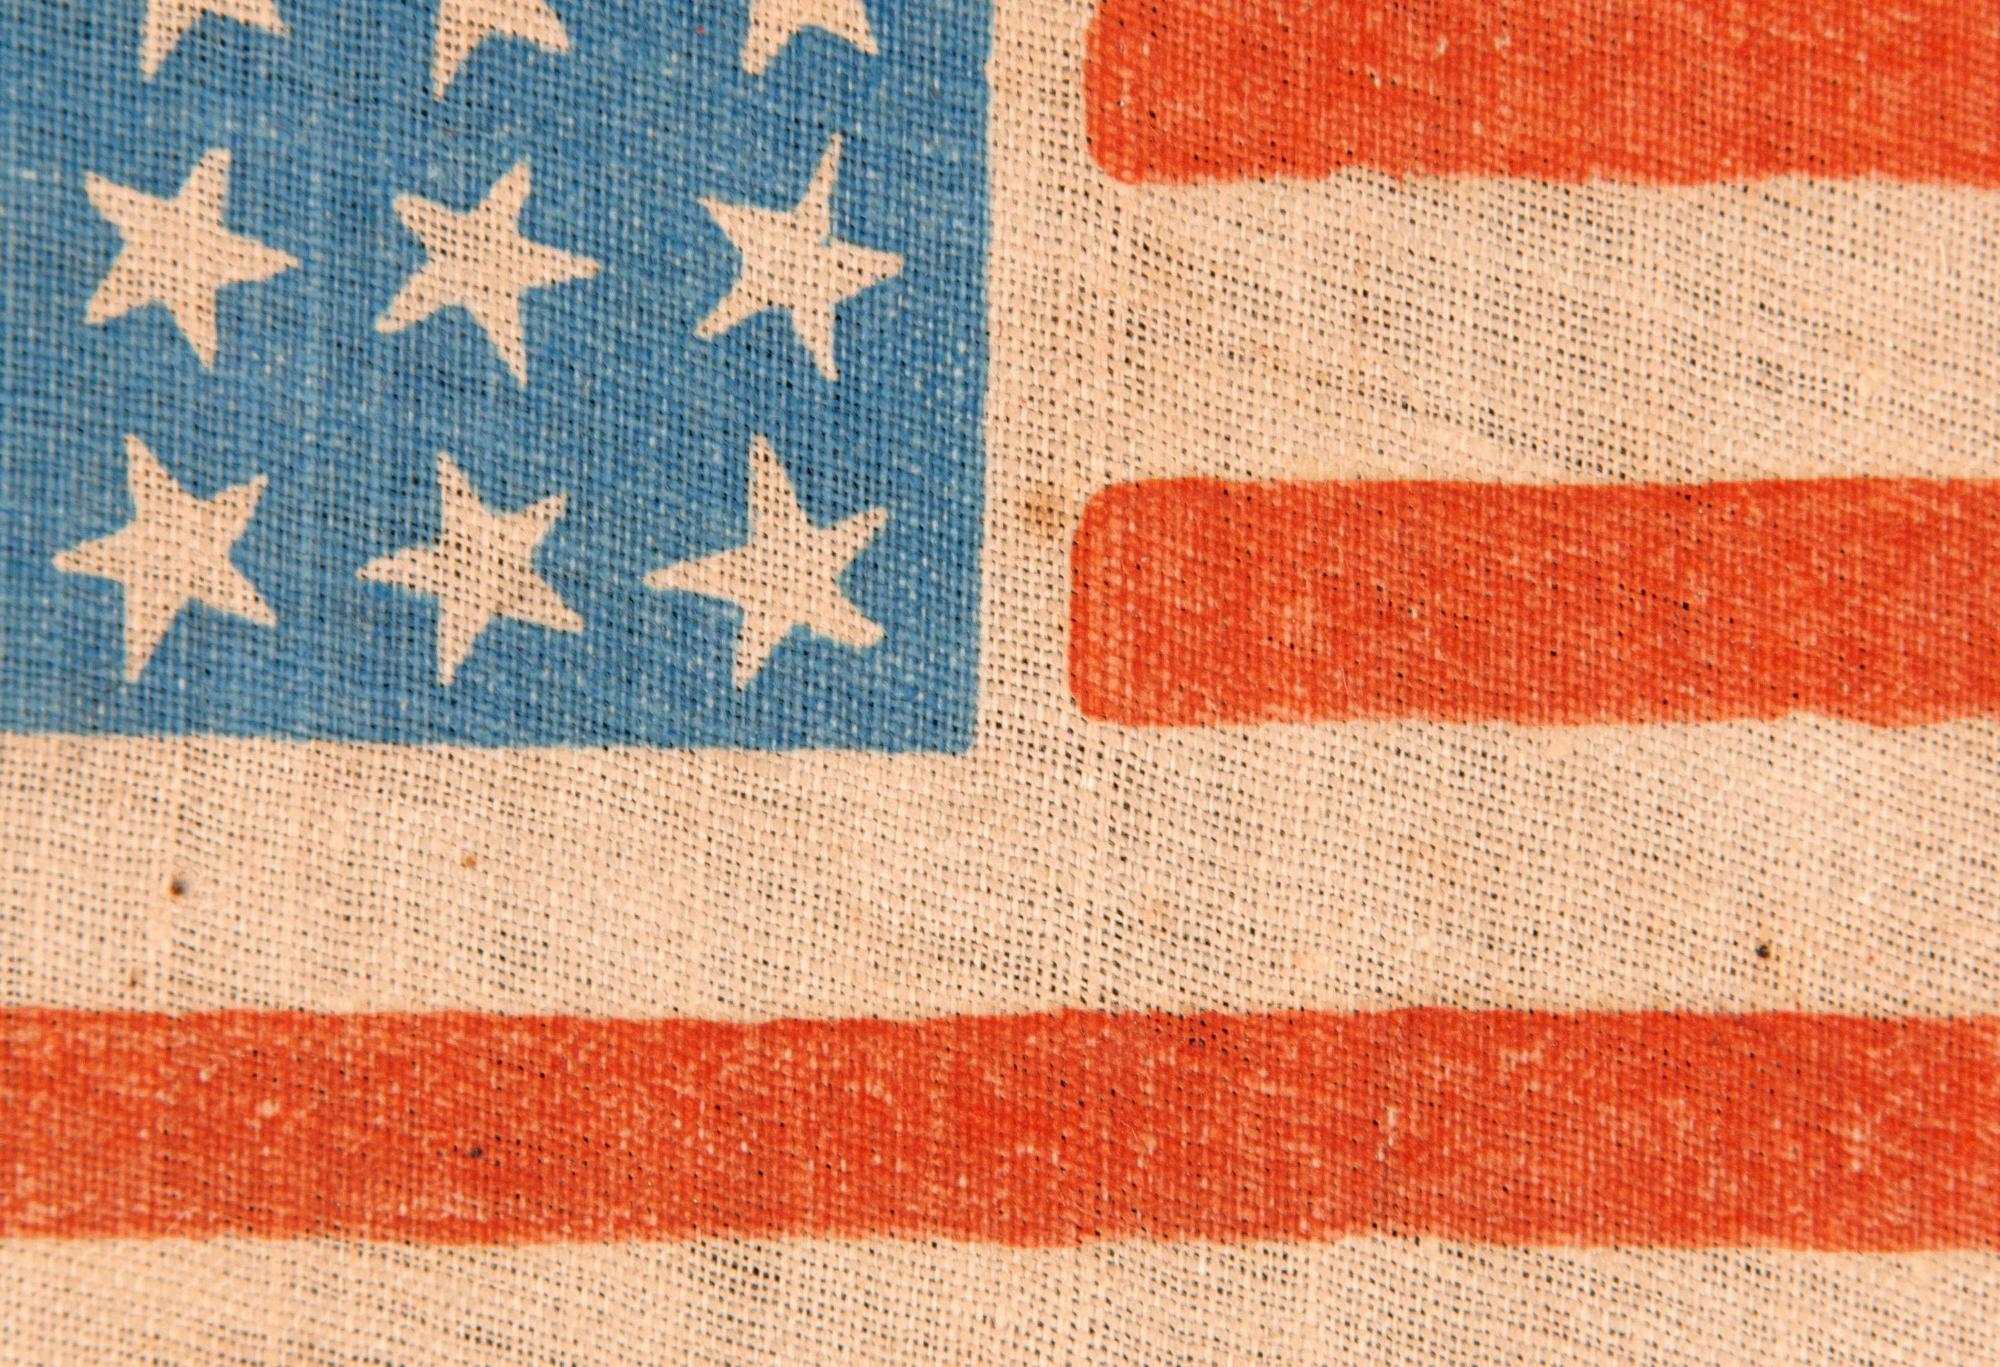 36 Star Antique American Parade Flag, with Canted Stars, ca 1864-1867 In Good Condition For Sale In York County, PA